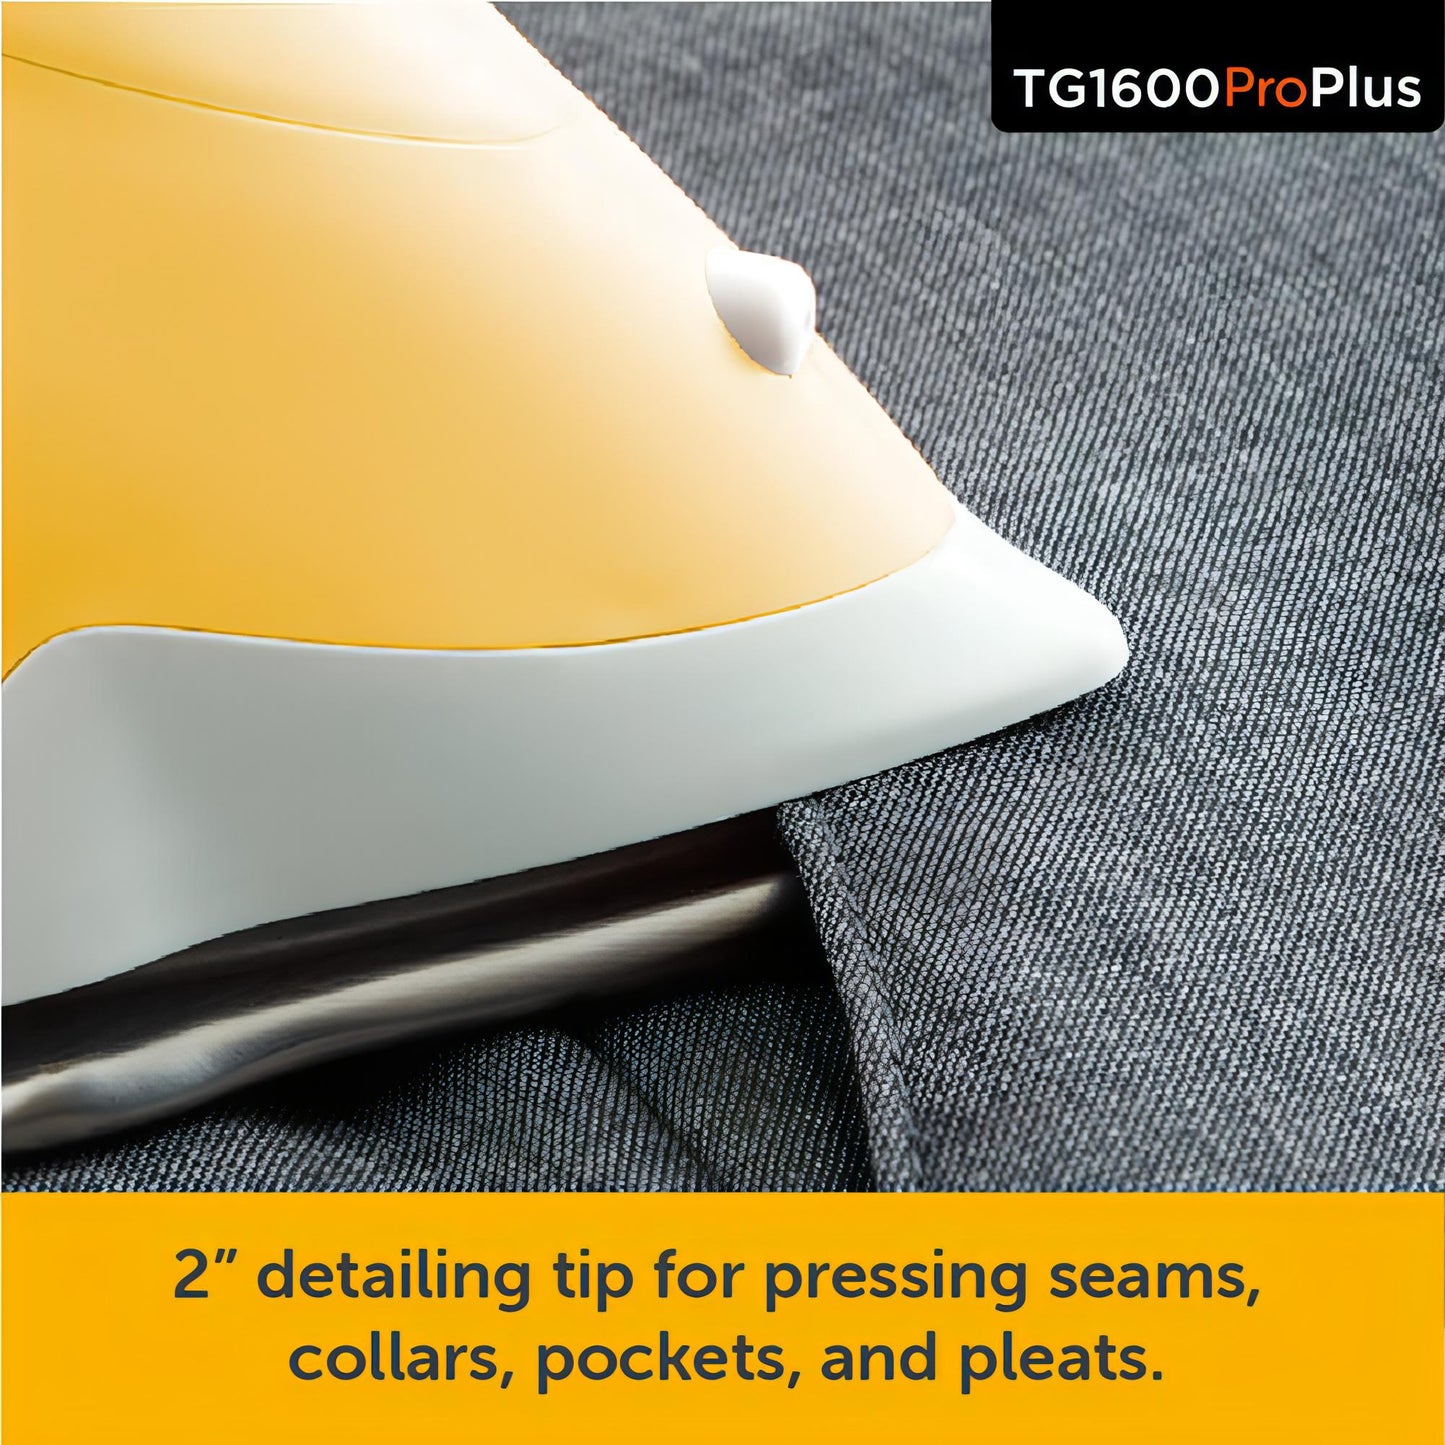 Oliso ProPlus Auto-lift Smart Iron TG1600 pro plus ** new model now with FREE MINI pressing board exclusive to Singer Outlet ** - For general ironing, plus features for quilters and sewists